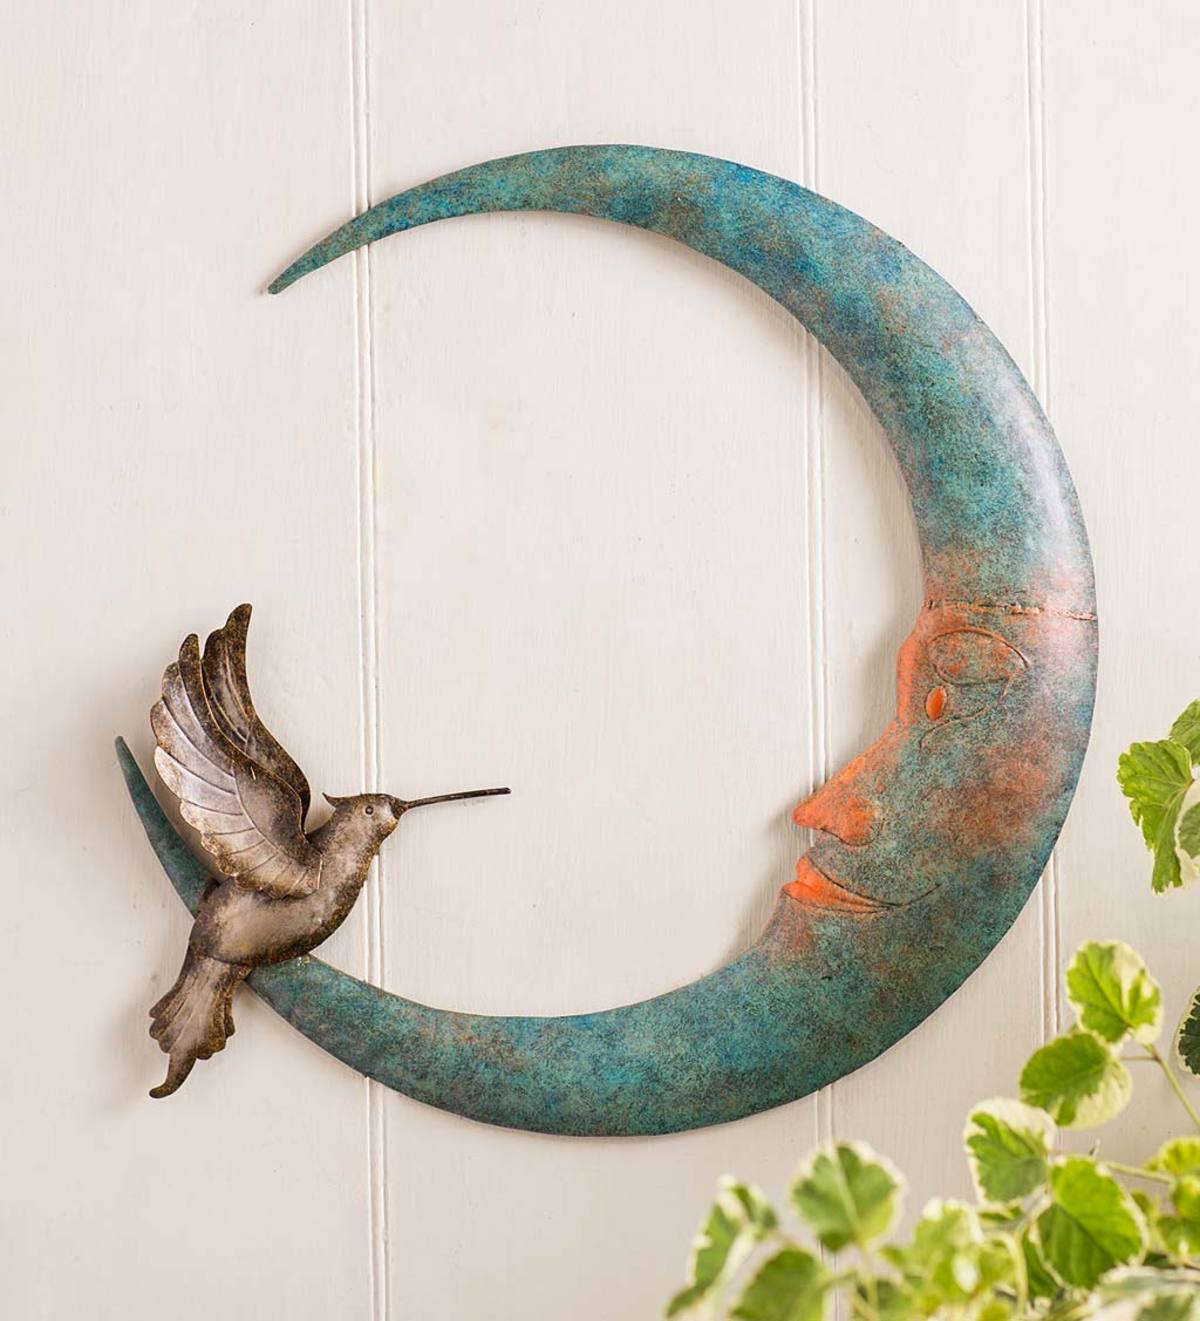 Cresent Moon Metal Wall Art Decor 15" inches tall 7 1/2" inches wide 